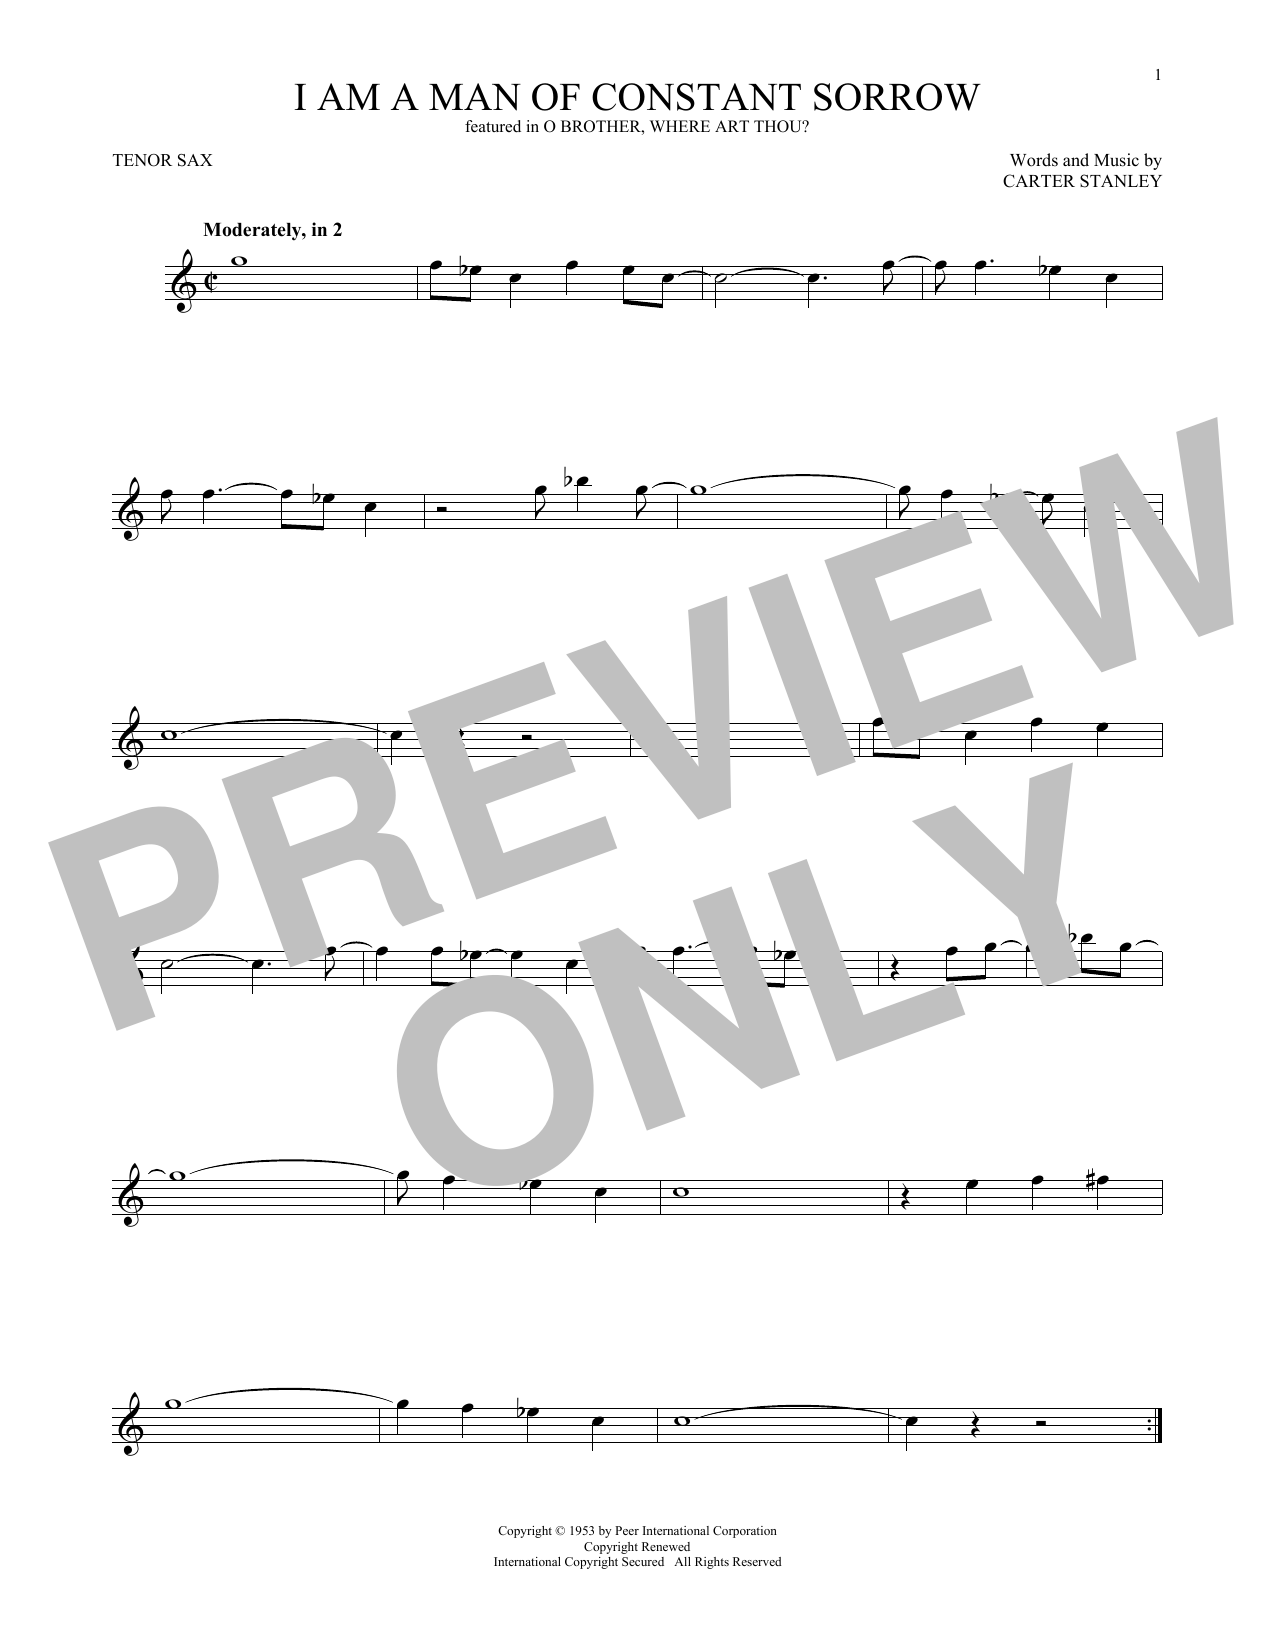 Download Carter Stanley I Am A Man Of Constant Sorrow Sheet Music